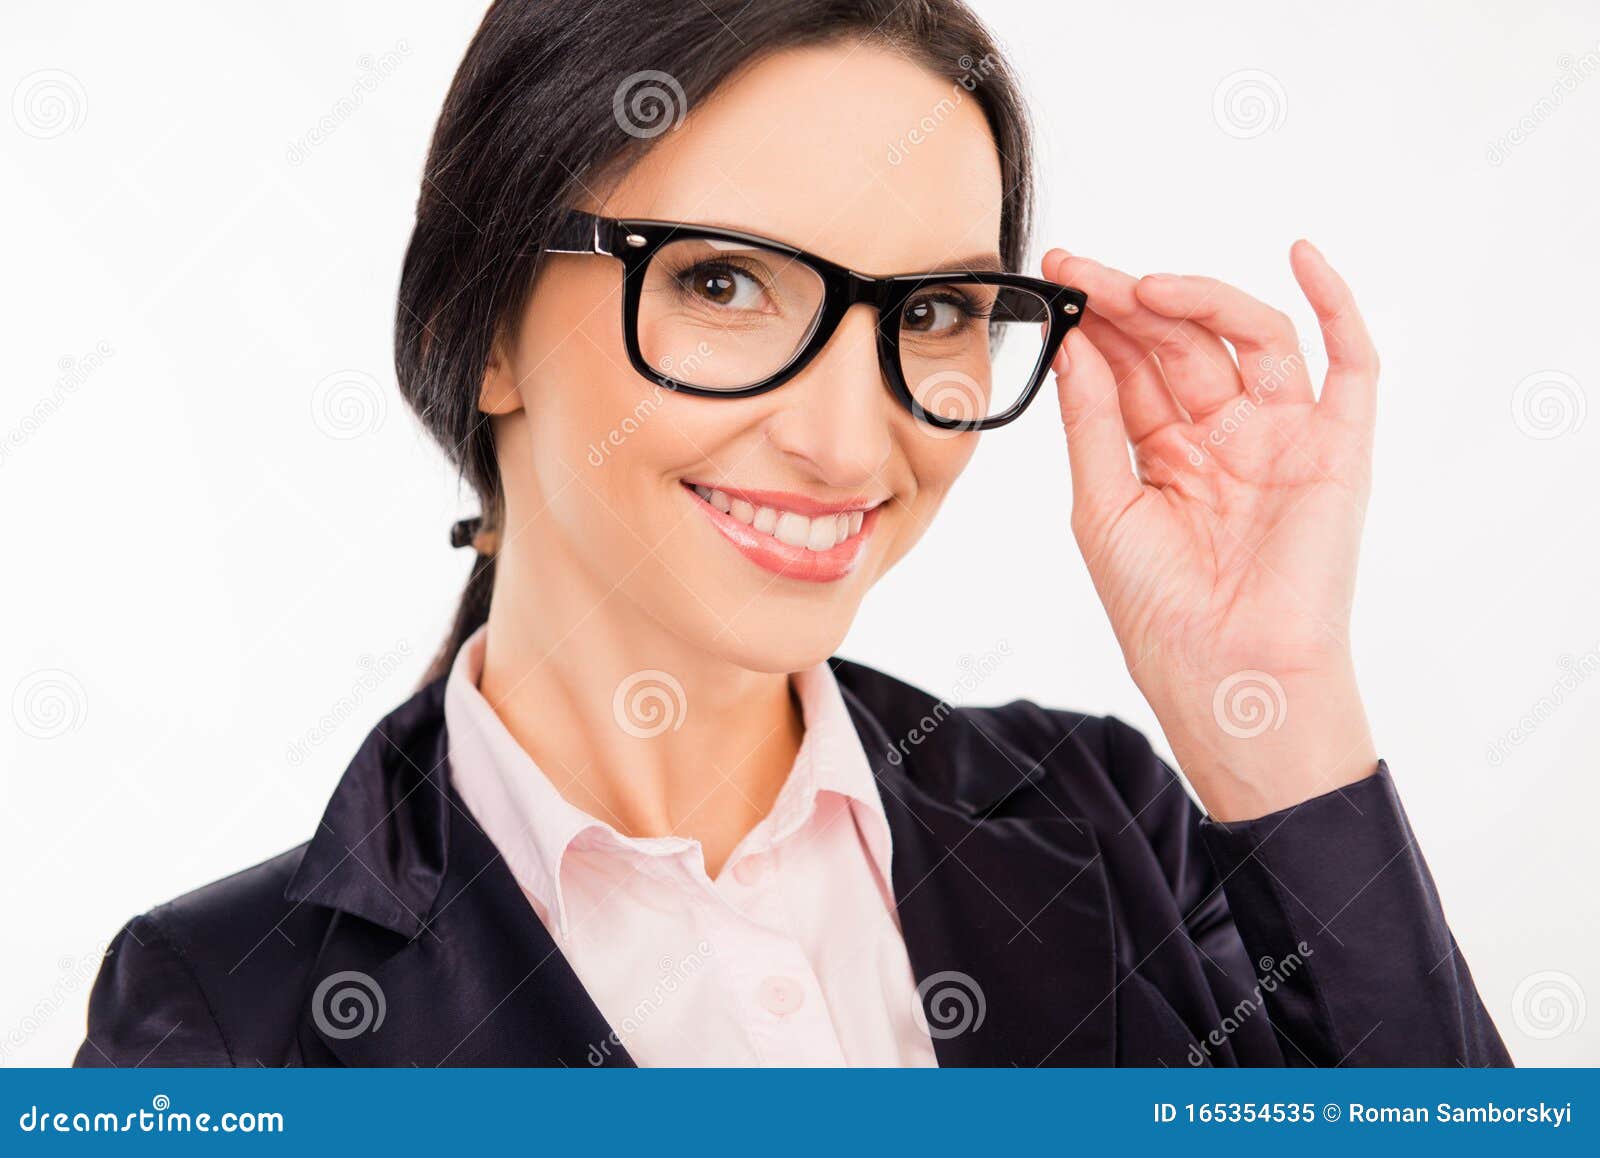 Smart Beautiful Woman In Glasses Smiling And Adjusting Her Glasses 